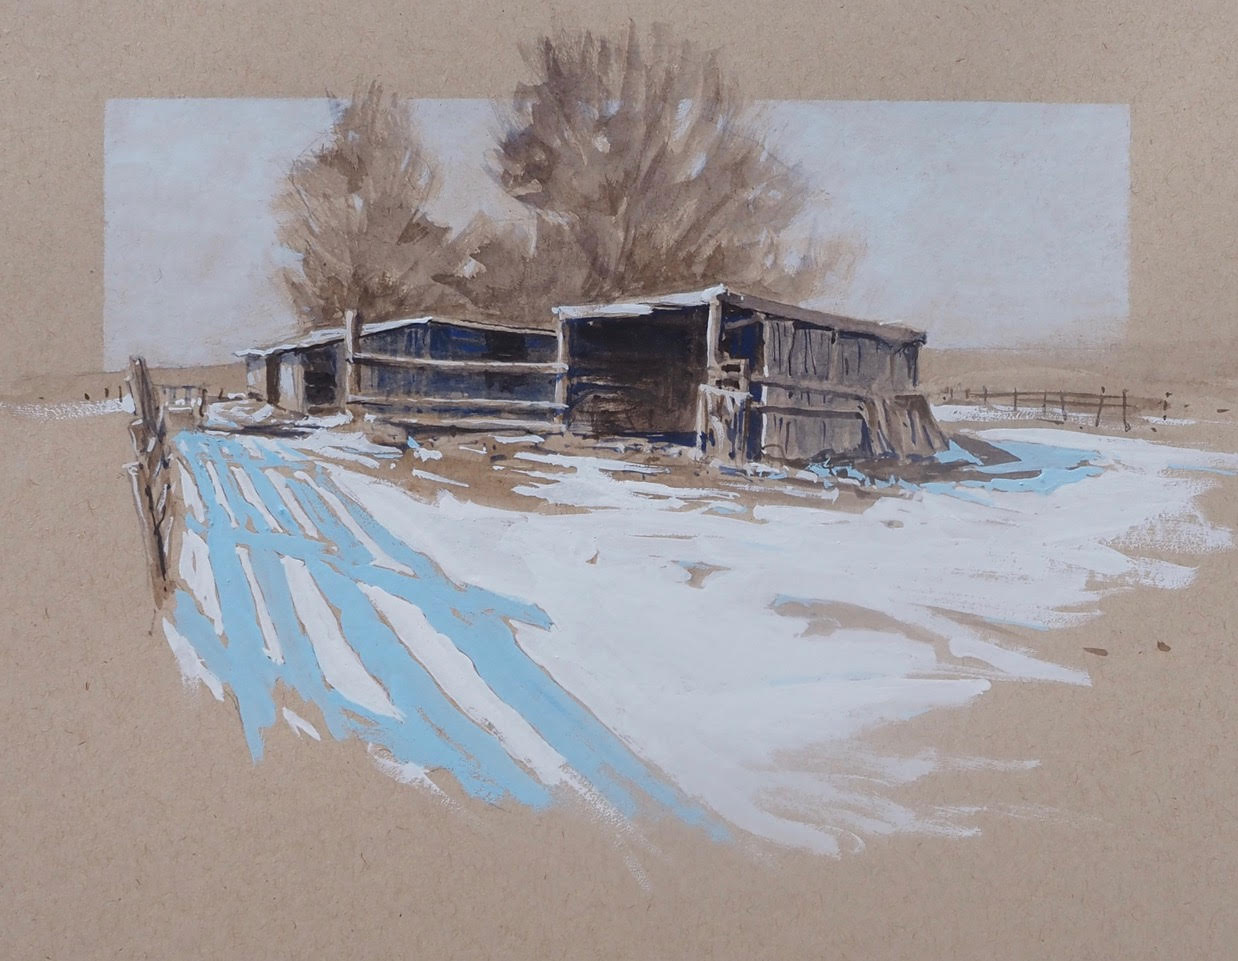 watercolor & gouache of a livestock shelter in the snow